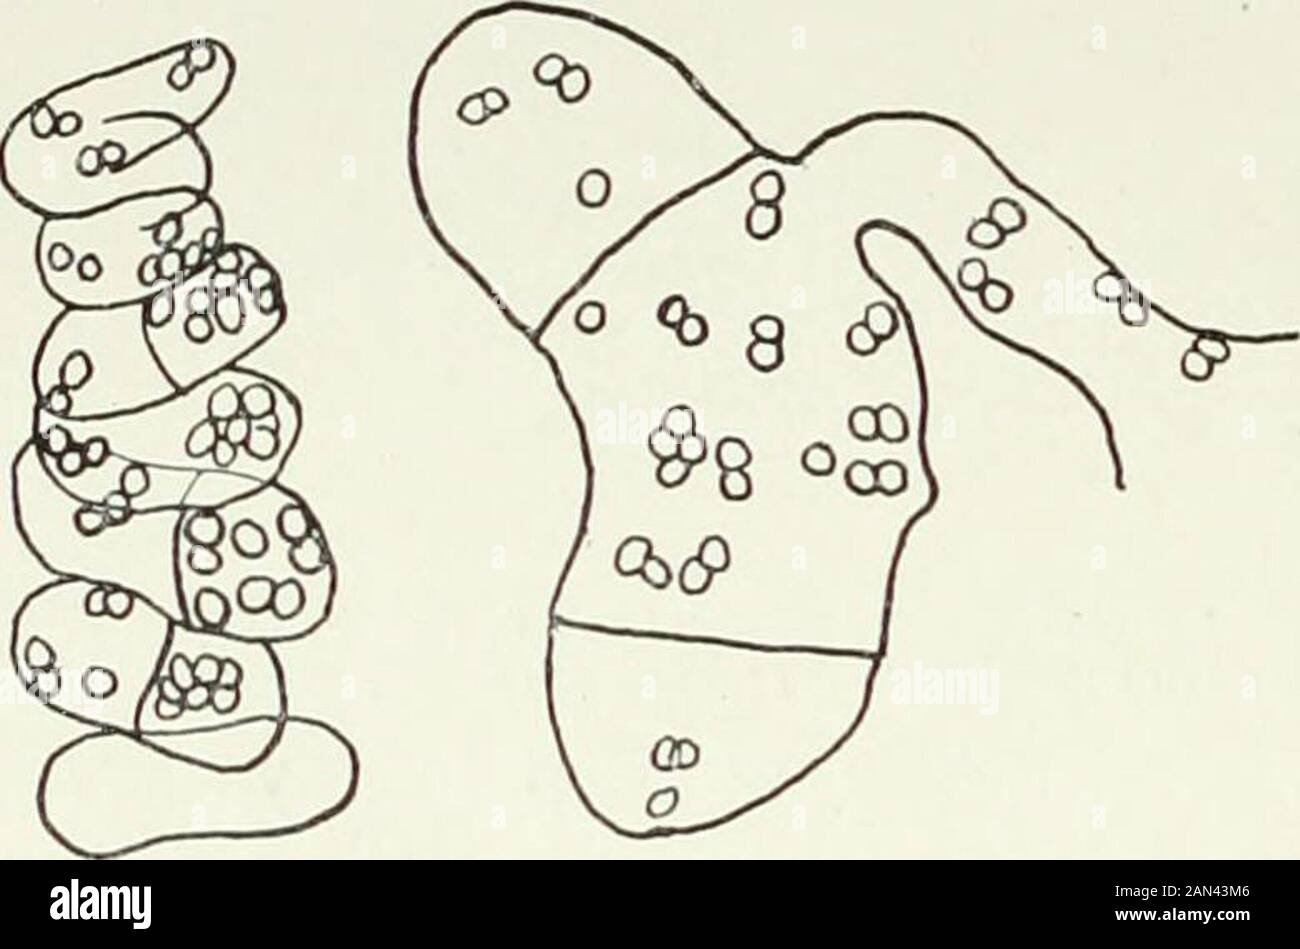 Fungi, Ascomycetes, Ustilaginales, Uredinales . Iig. 77. Ascobolus Winteri Rehm.; archi-carp, x 10S0 ; after Dodge. n8 DISCOMYCETES [CH.. Fig. 78. Ascobolus immersus Pers.: archicarps showingpaired nuclei, x 1000; after Kamlow. or four cells, which diminish gradually in diameter and which he termsa trichogyne. In Ascobolus immersus the mycelium consists of multinucleate cells, thearchicarp is larger than that of A. Winteri and contains some twentydivisions, it is otherwise very similar. The cells contain numerous largenuclei and pores develop between them ; the ascogenous hyphae arise froma si Stock Photo